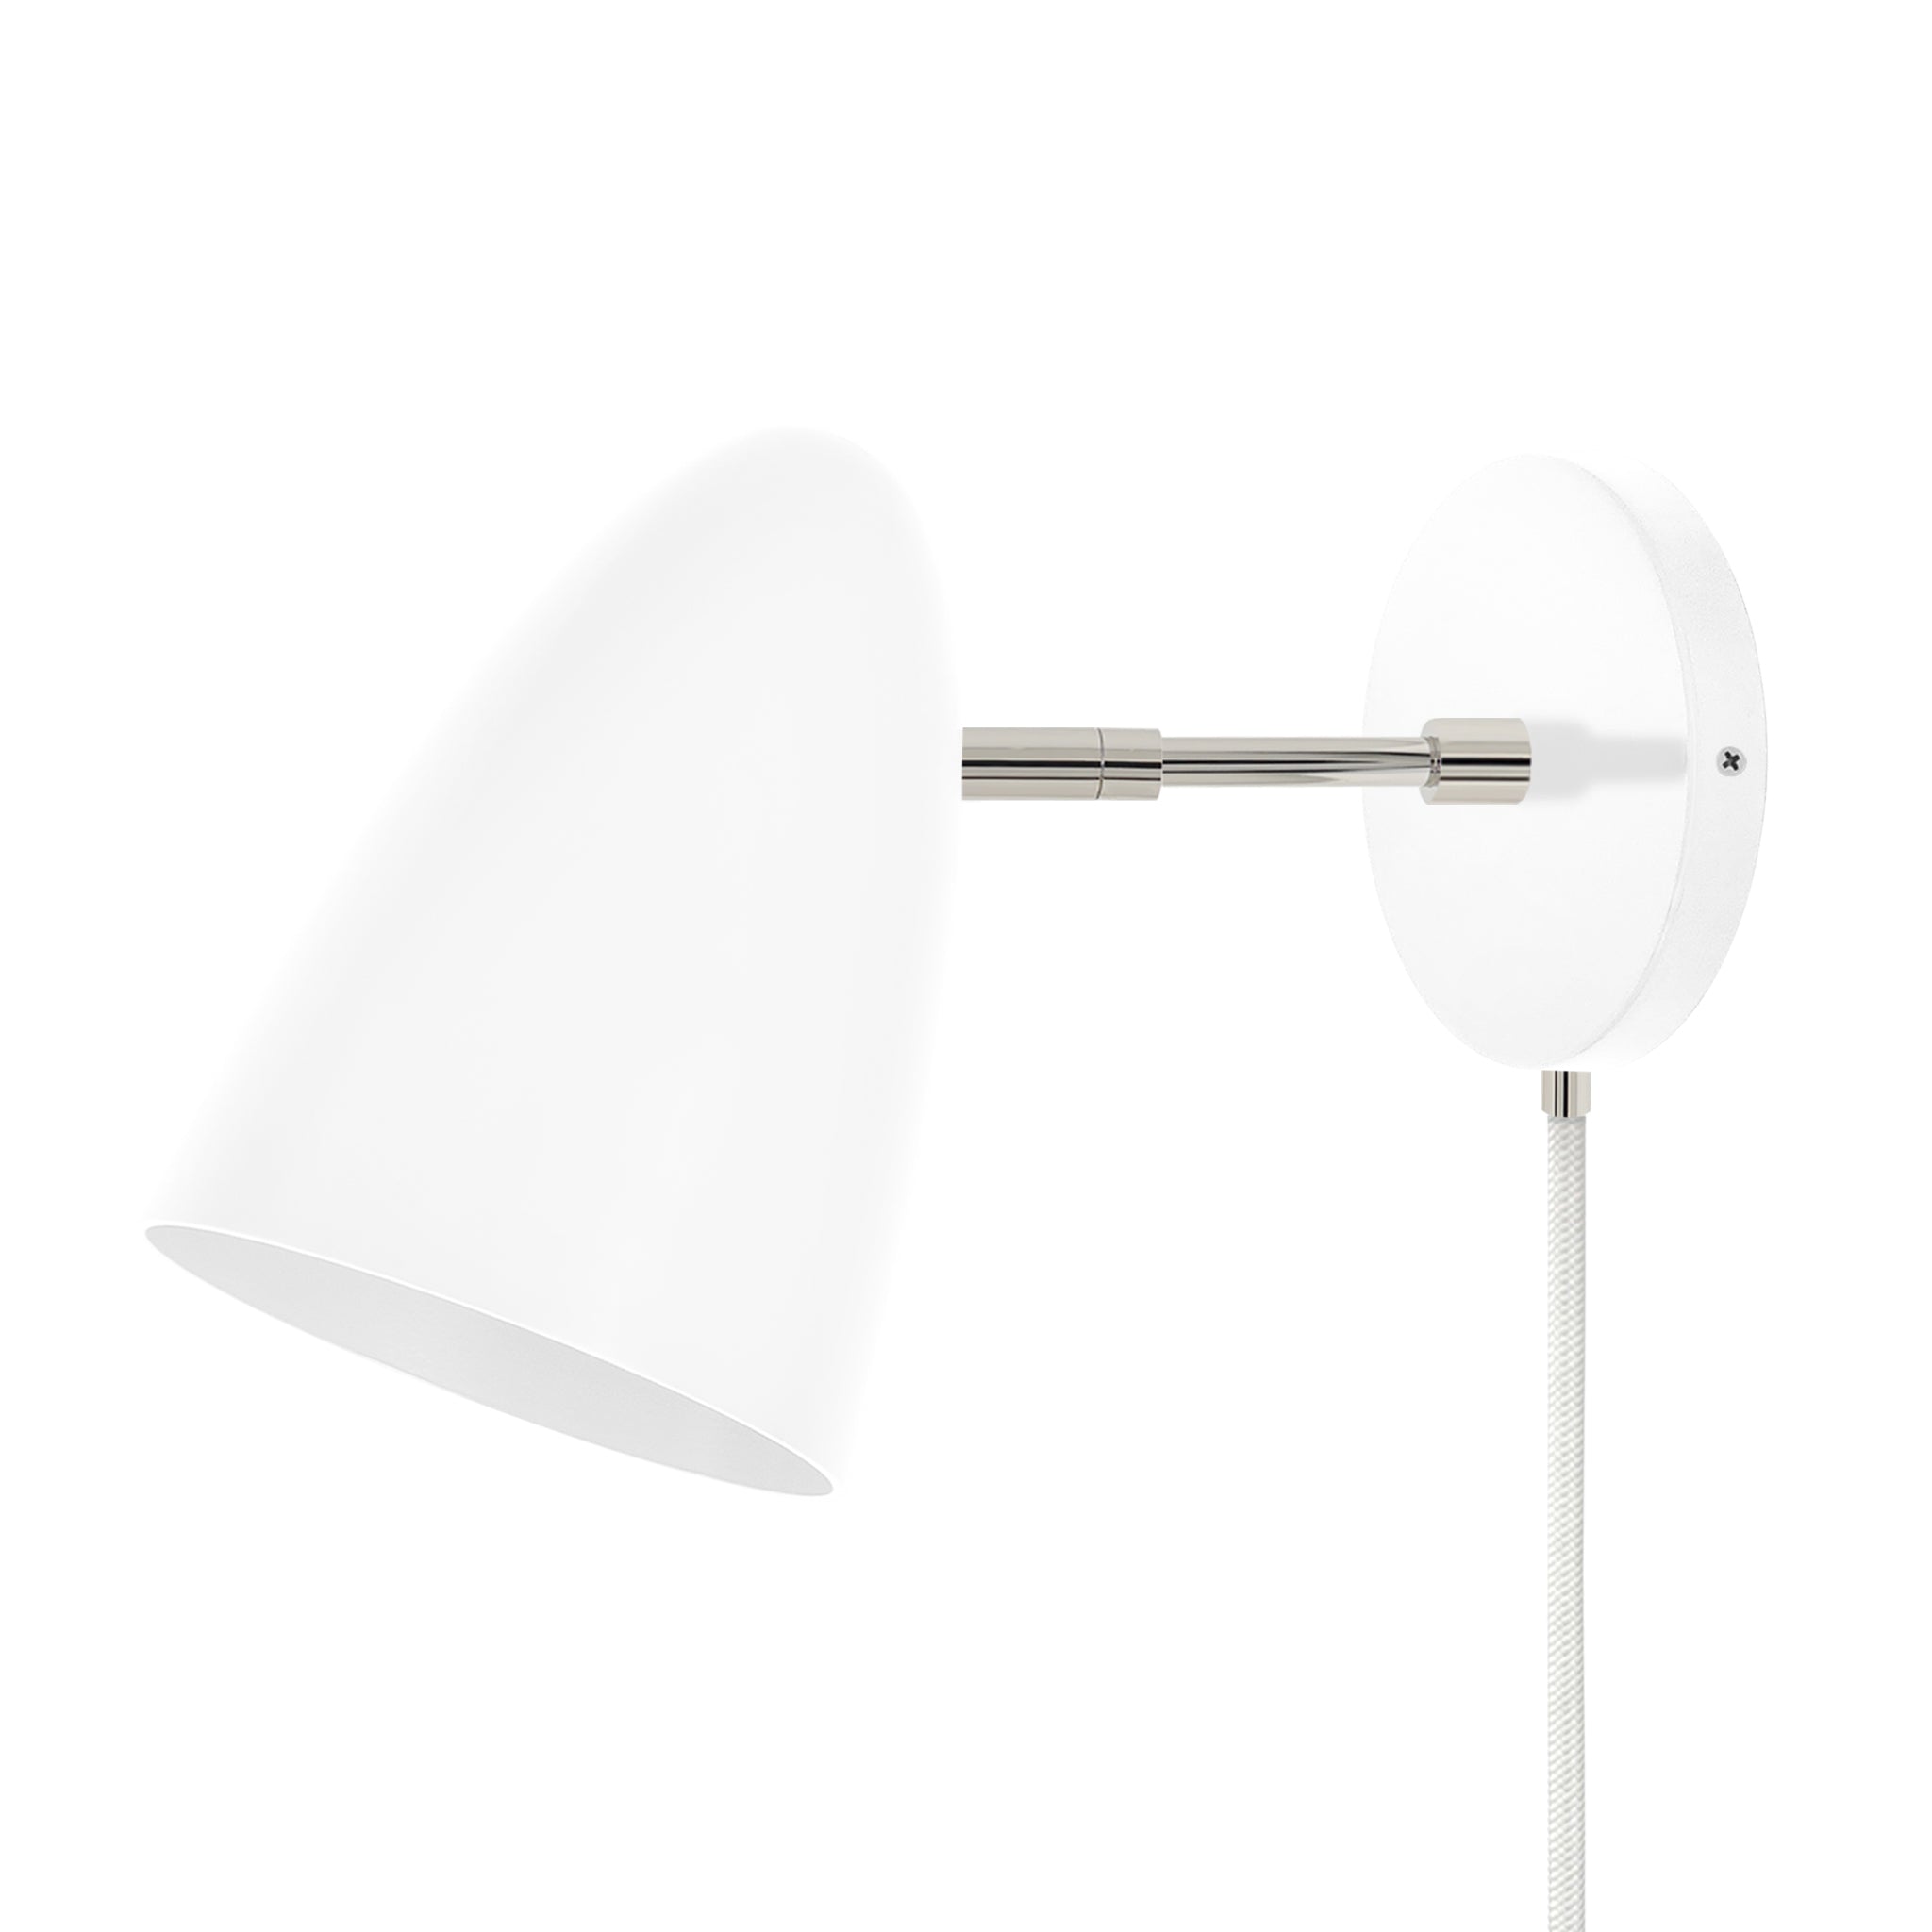 Nickel and white color Boom plug-in sconce 3" arm Dutton Brown lighting